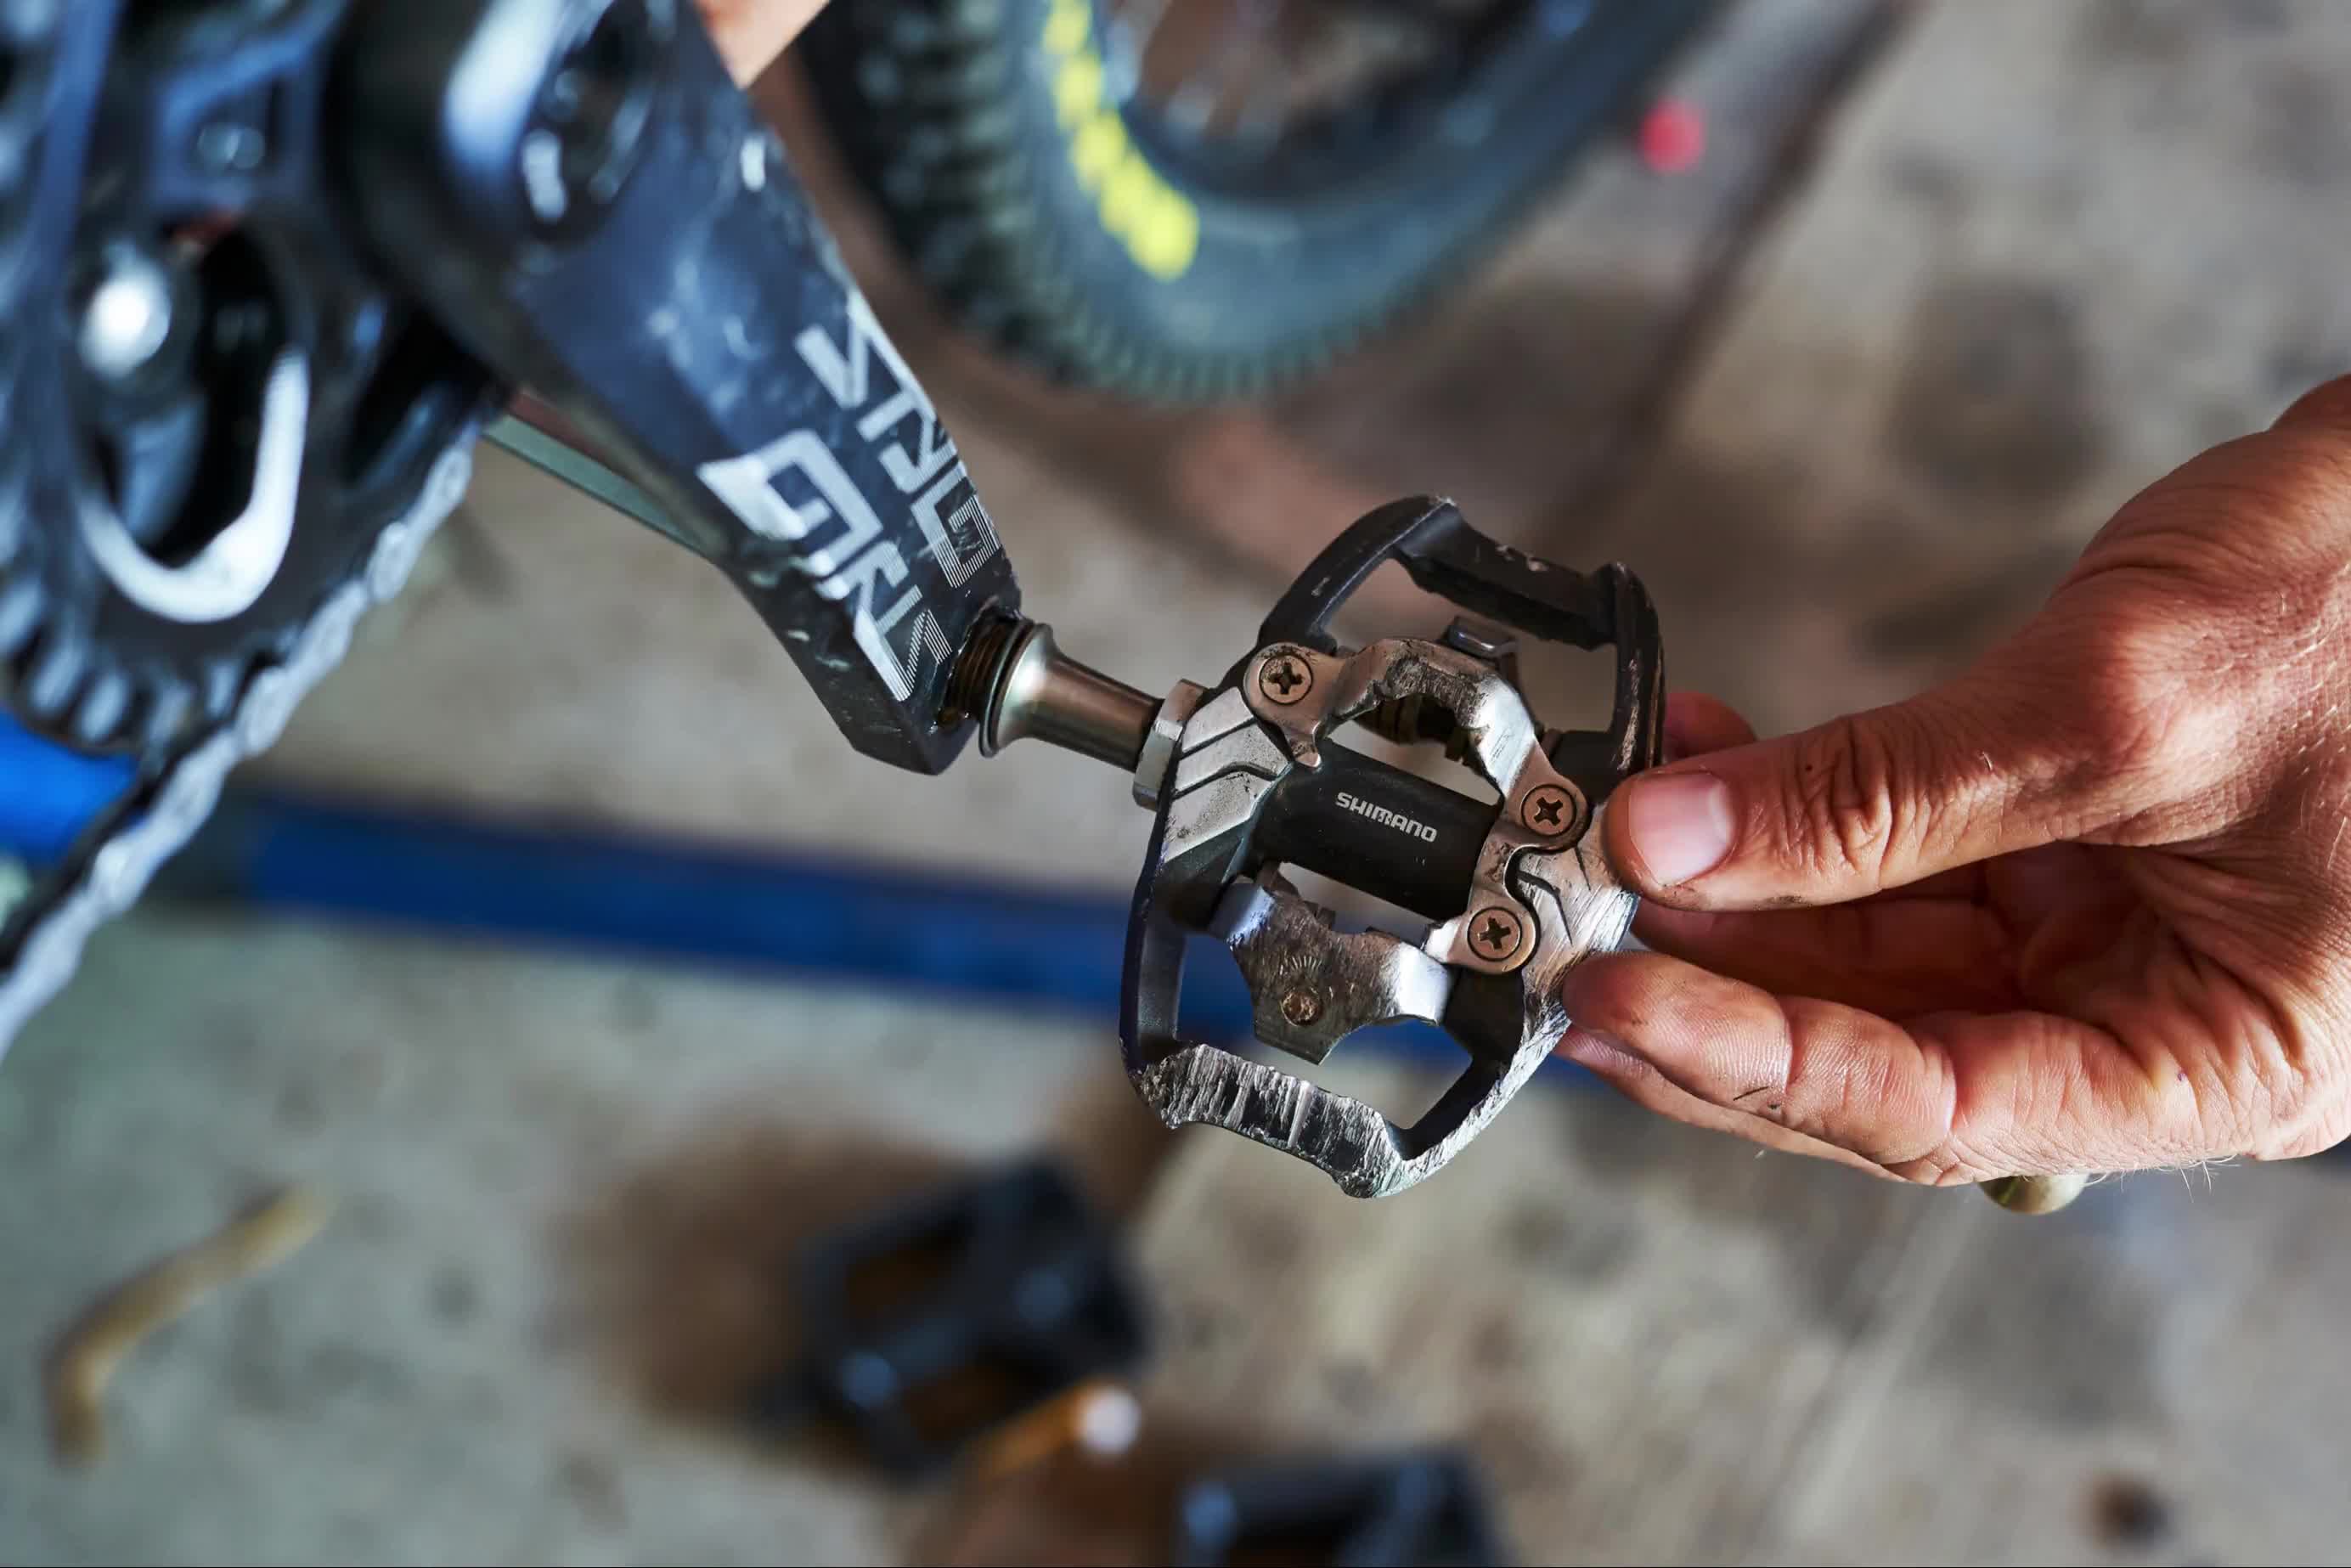 ijsje schild Lucht How to Install Clipless Pedals | Guide to Clipless Bike Pedals